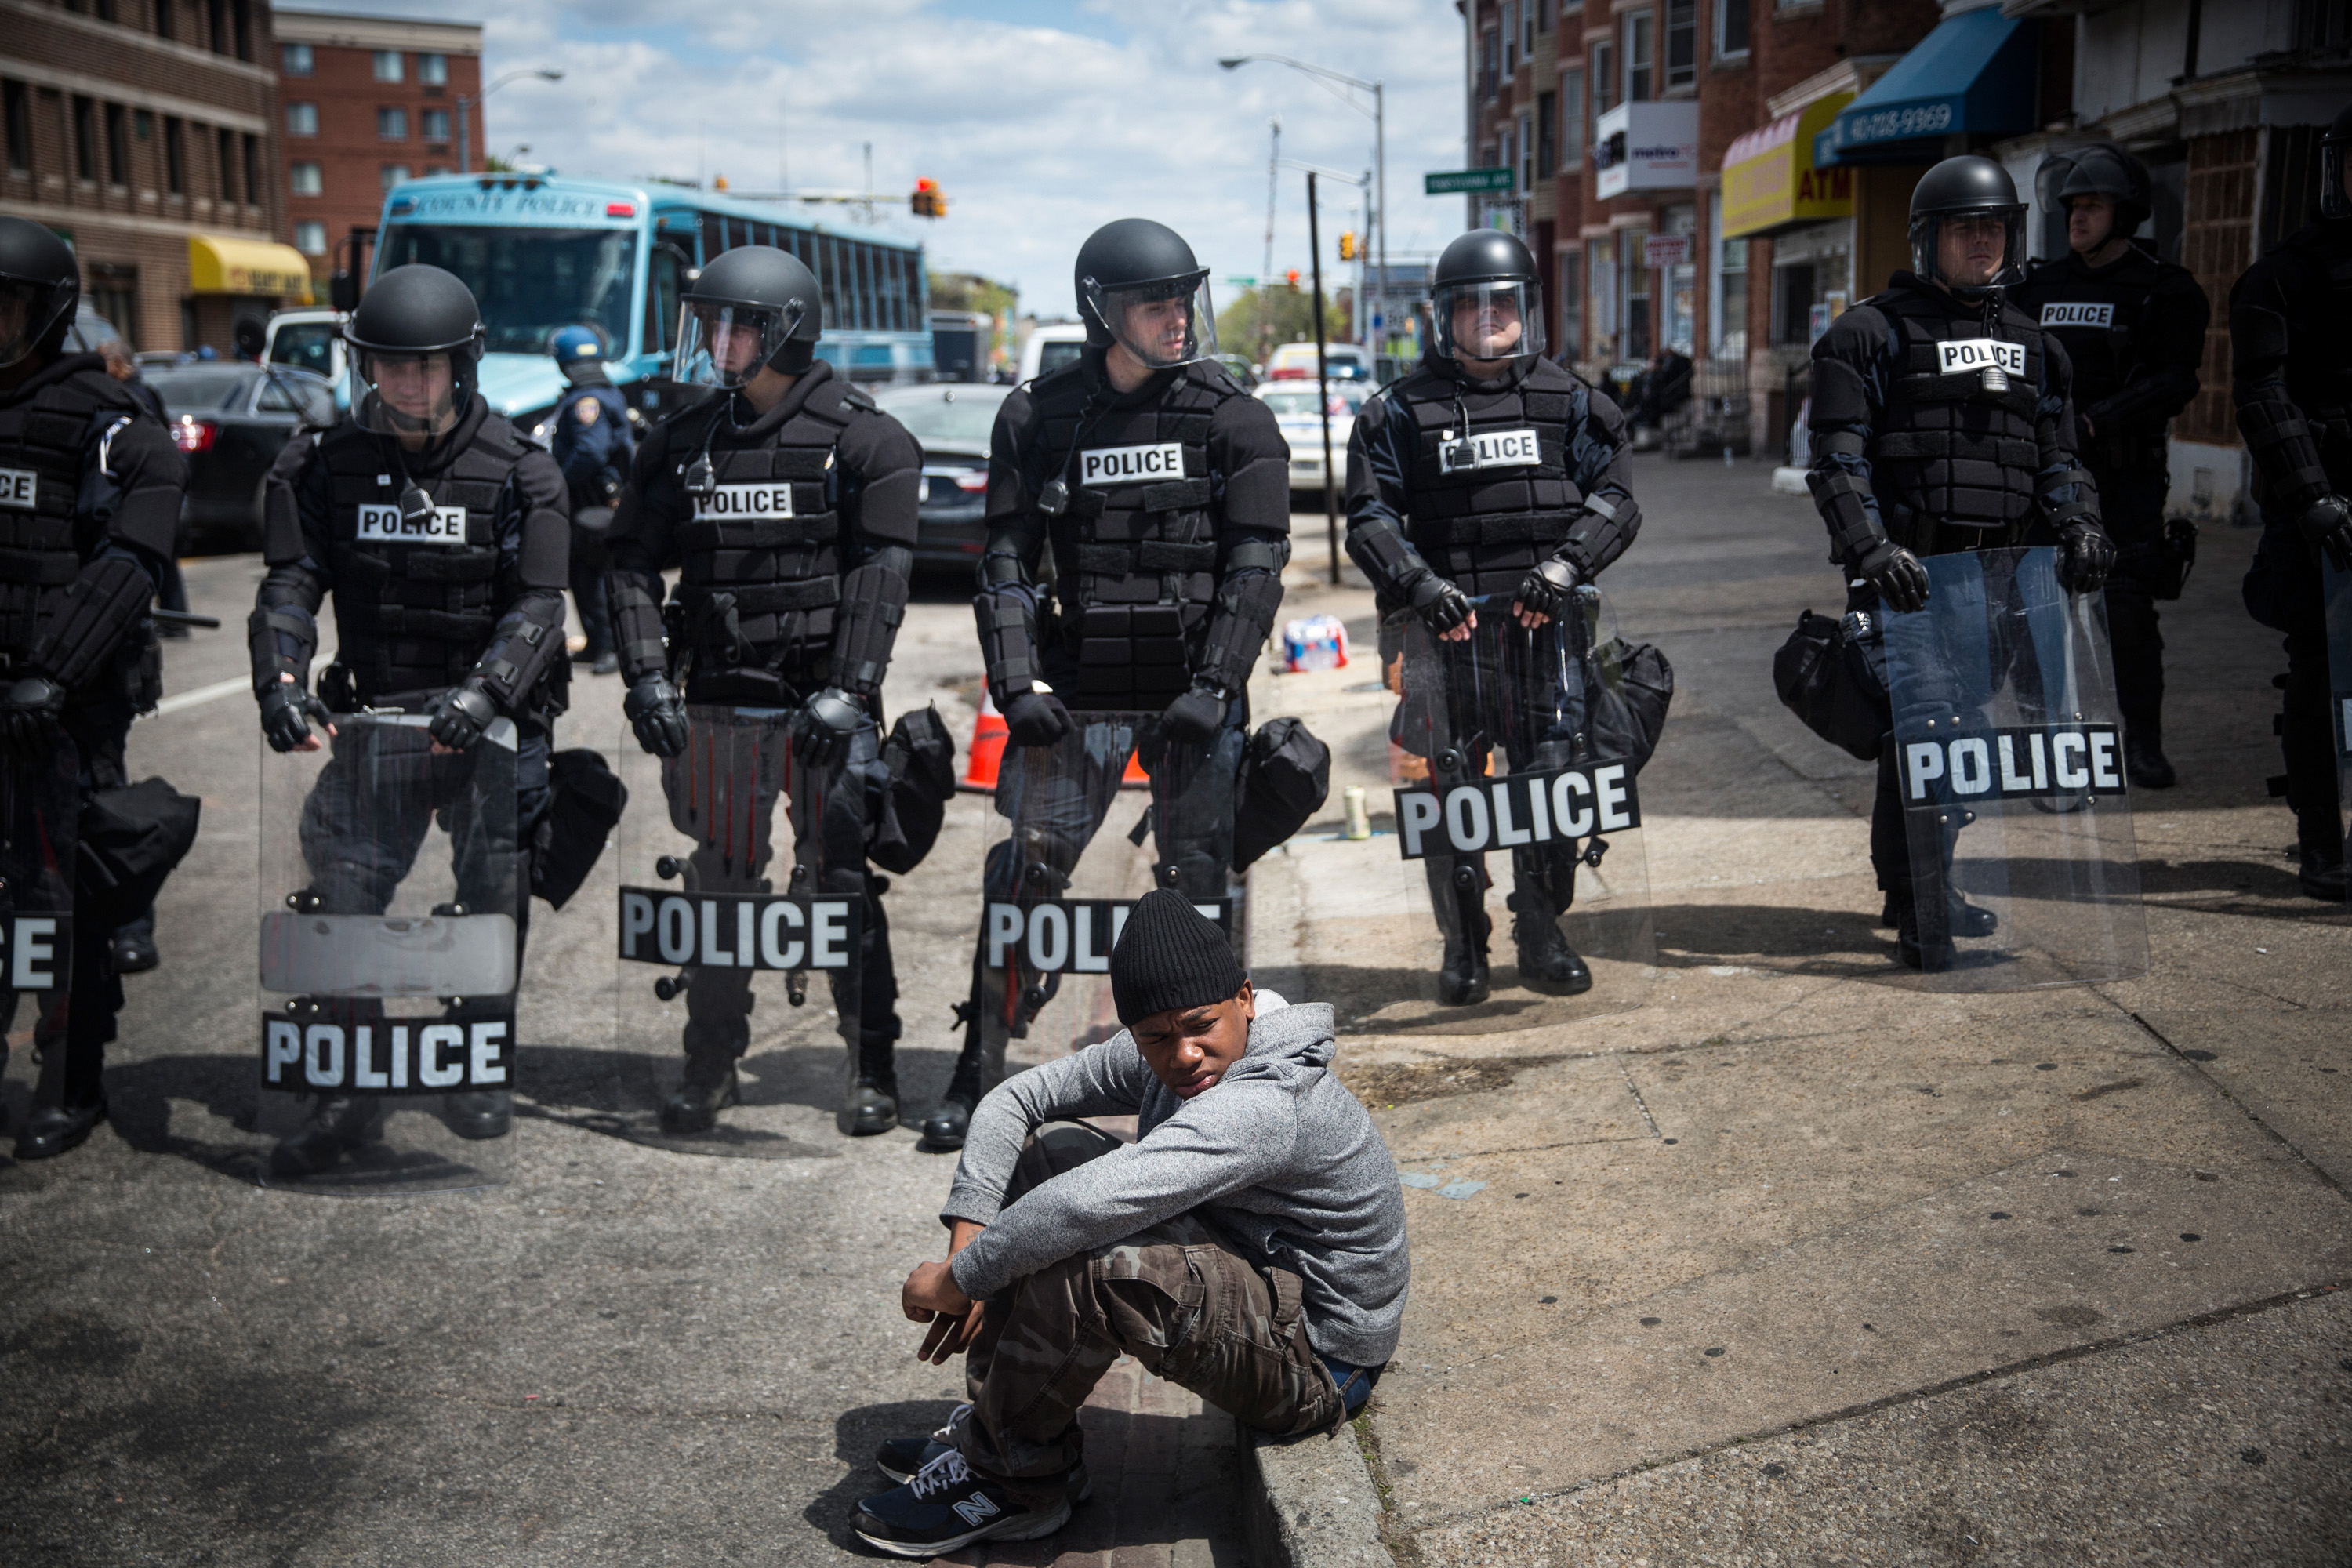 BALTIMORE, MD - APRIL 28: Daquan Green, age 17, sits on the curb while riot police stand guard near the CVS pharmacy that was set on fire yesterday during rioting after the funeral of Freddie Gray, on April 28, 2015 in Baltimore, Maryland. Gray, 25, was arrested for possessing a switch blade knife April 12 outside the Gilmor Houses housing project on Baltimore's west side. According to his attorney, Gray died a week later in the hospital from a severe spinal cord injury he received while in police custody. (Photo by Andrew Burton/Getty Images)